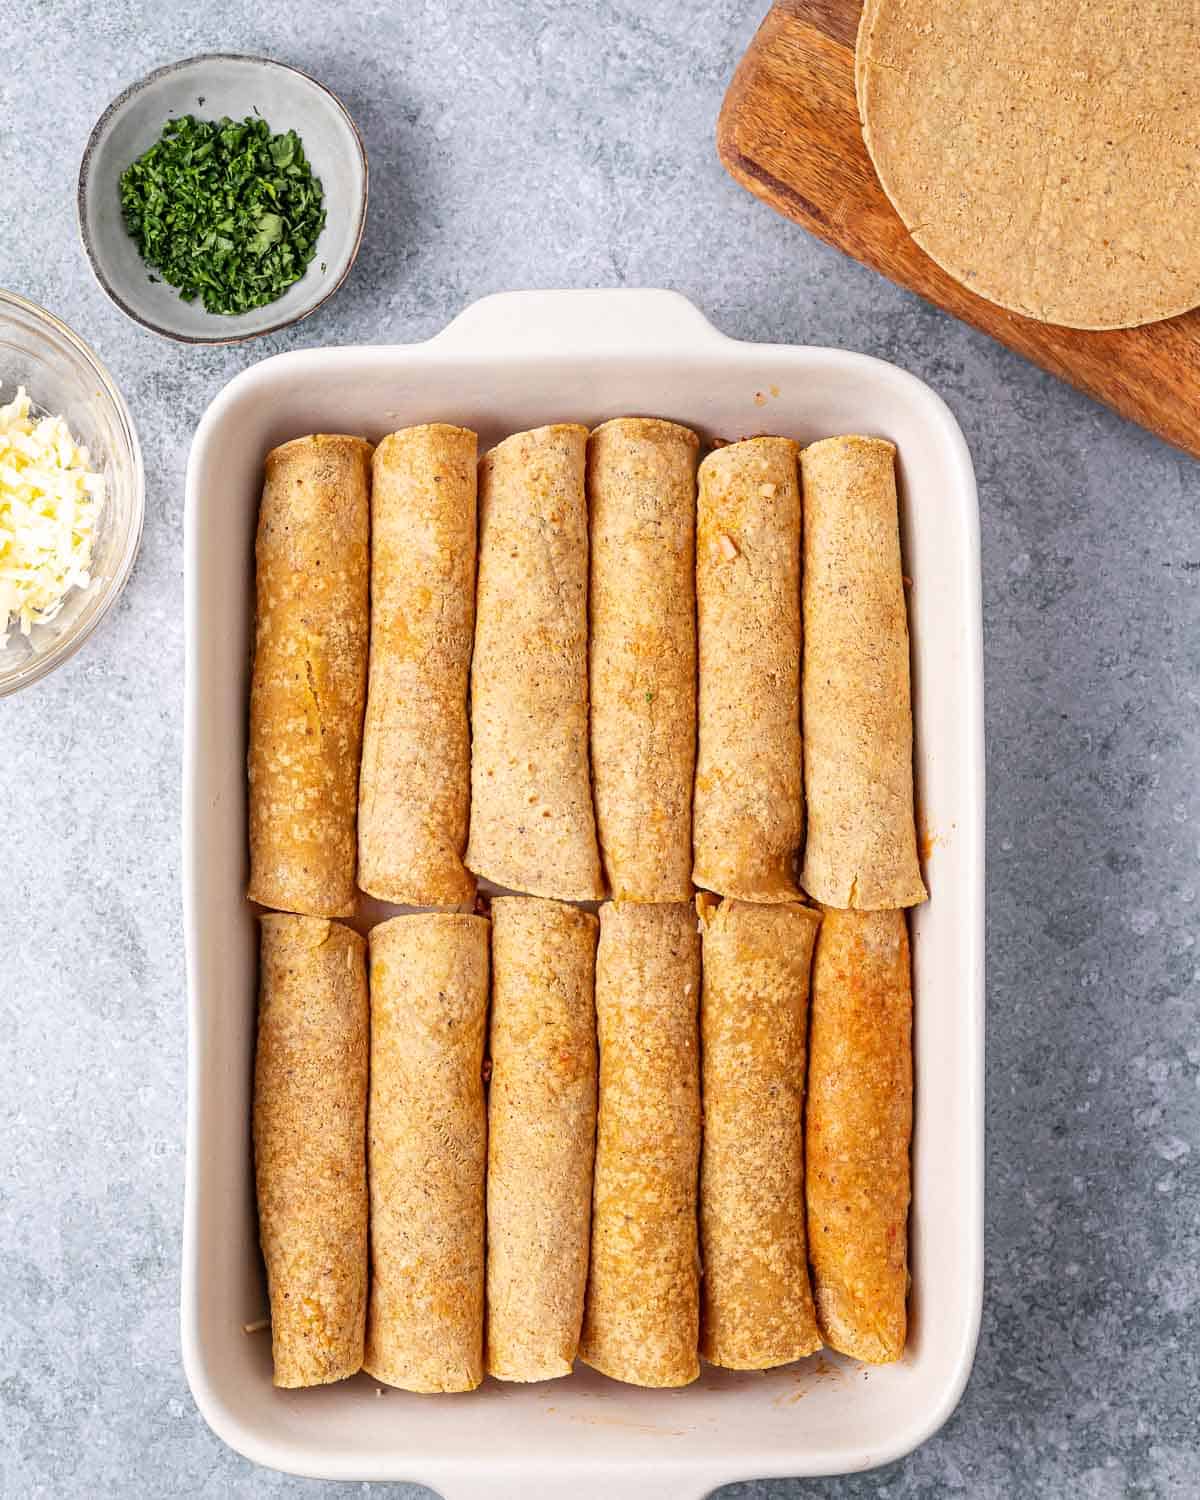 Tortillas rolled and placed in a baking pan.